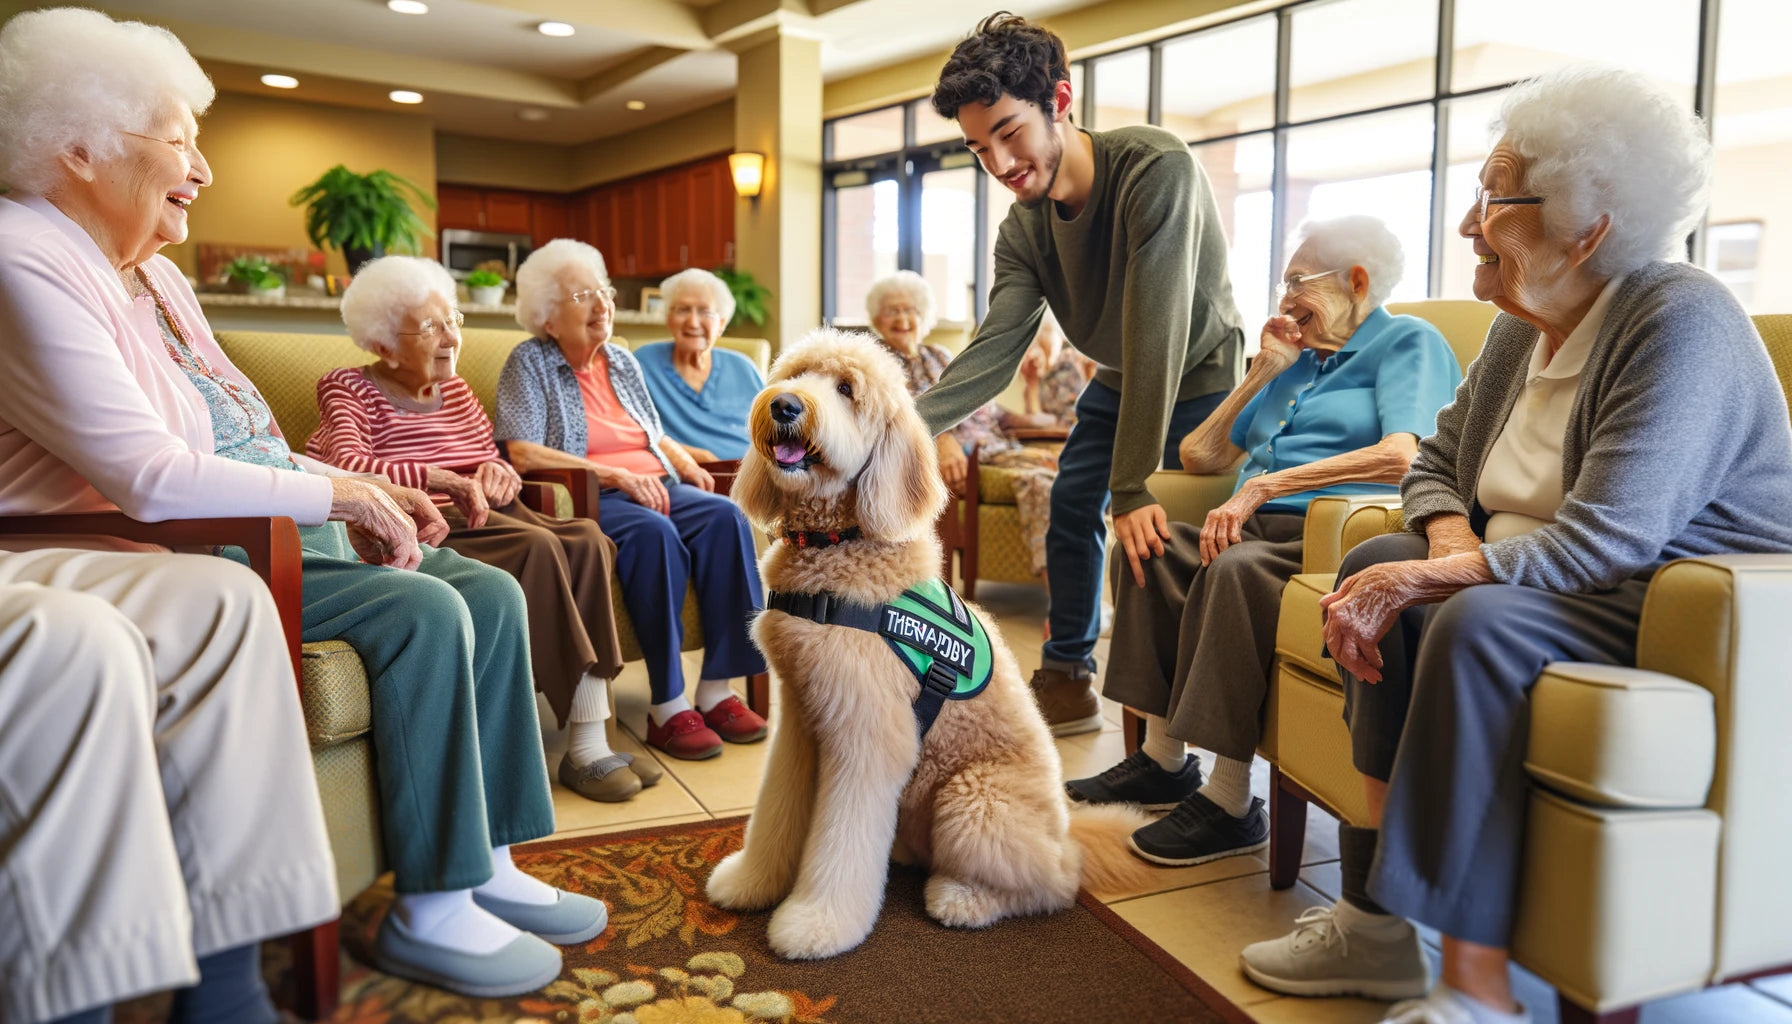 Therapy Mini Goldendoodle wearing a vest gently interacting with residents in a senior living facility, showcasing its role in providing joy.